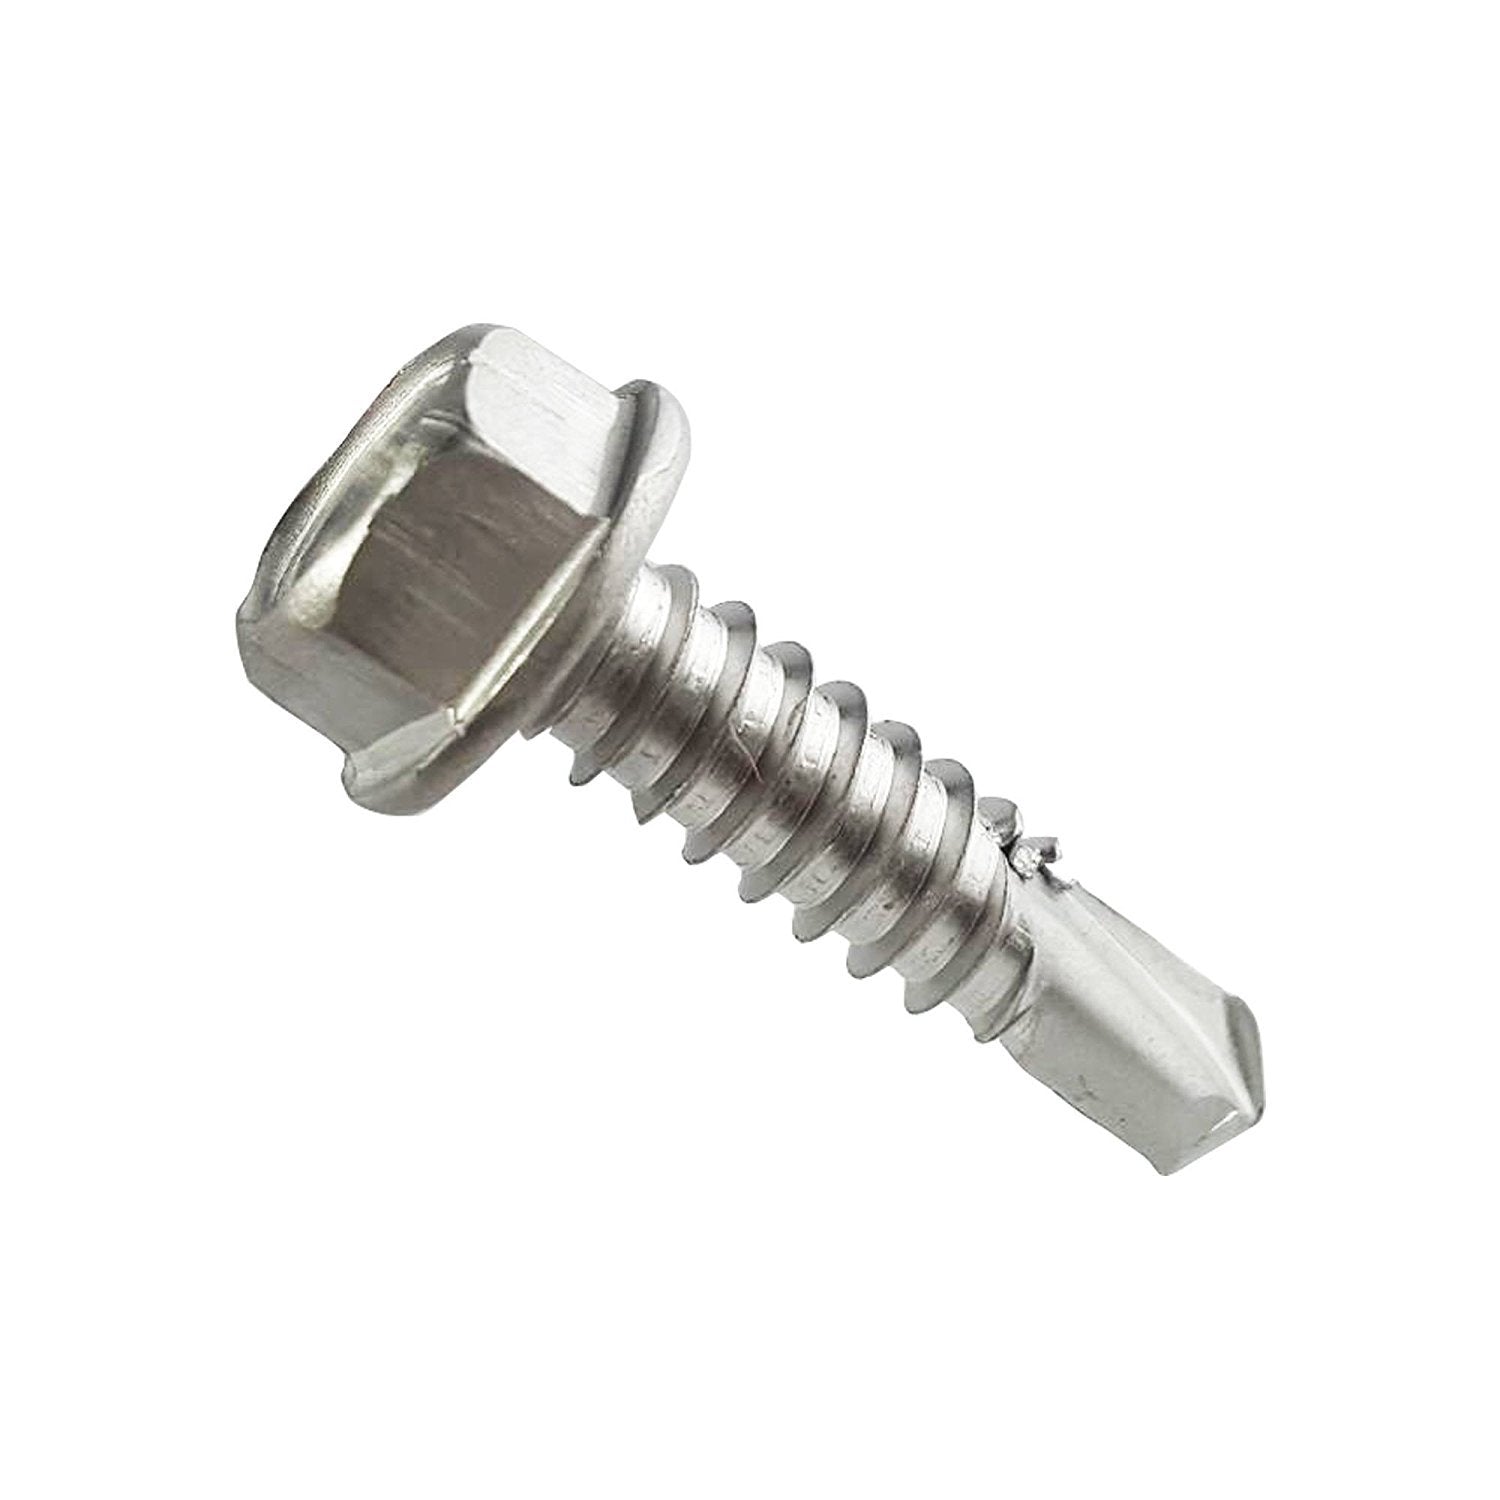 14G X 75Mm Stainless Hex Flange Head Timber Screw (400 Pack)